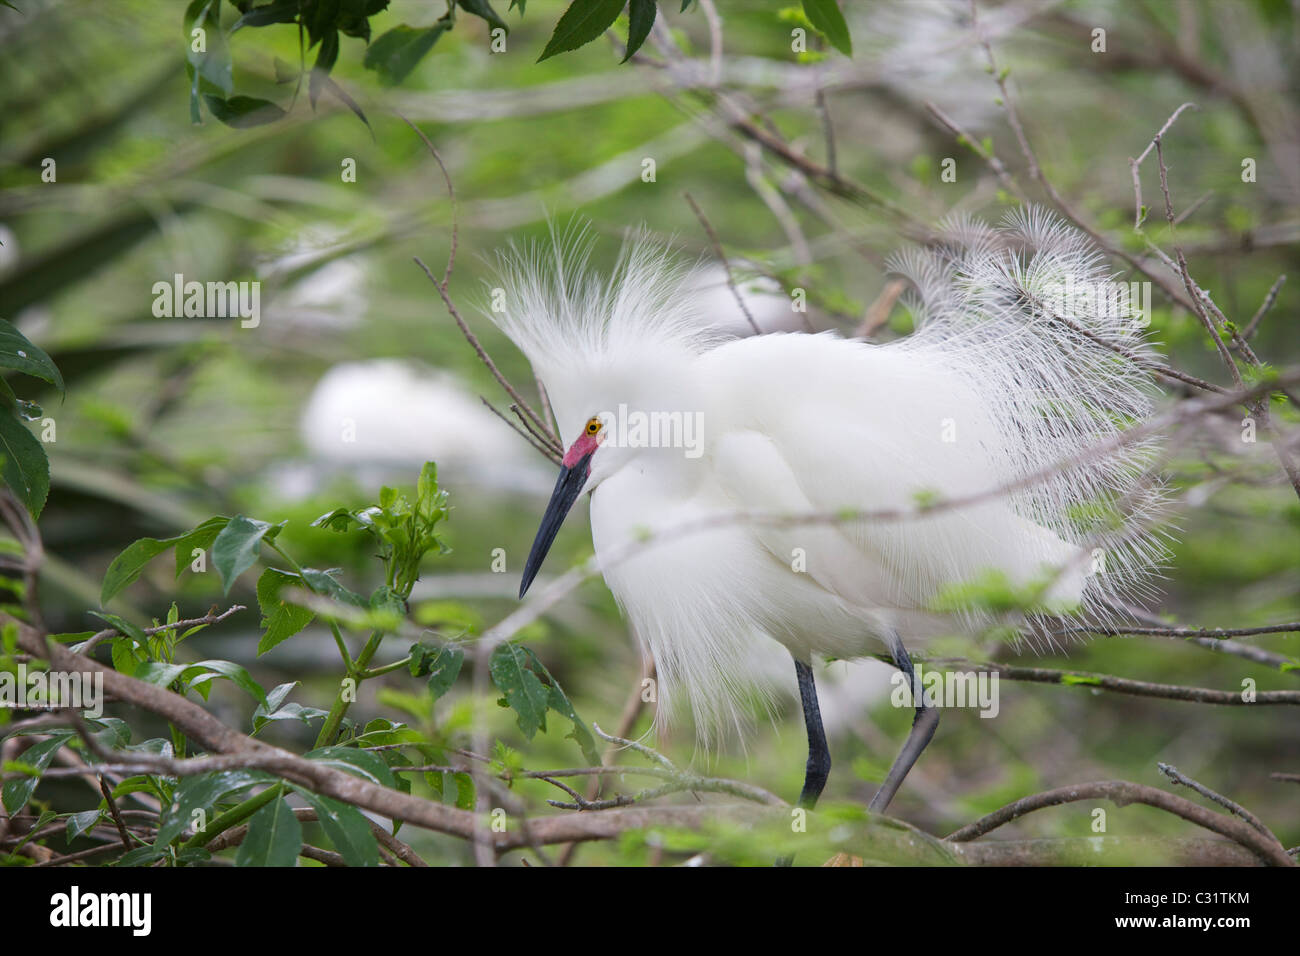 Snowy Egret (Egretta thula) displaying its feathers to attract a mate.  Upper bill is red to show it is ready to breed. Stock Photo